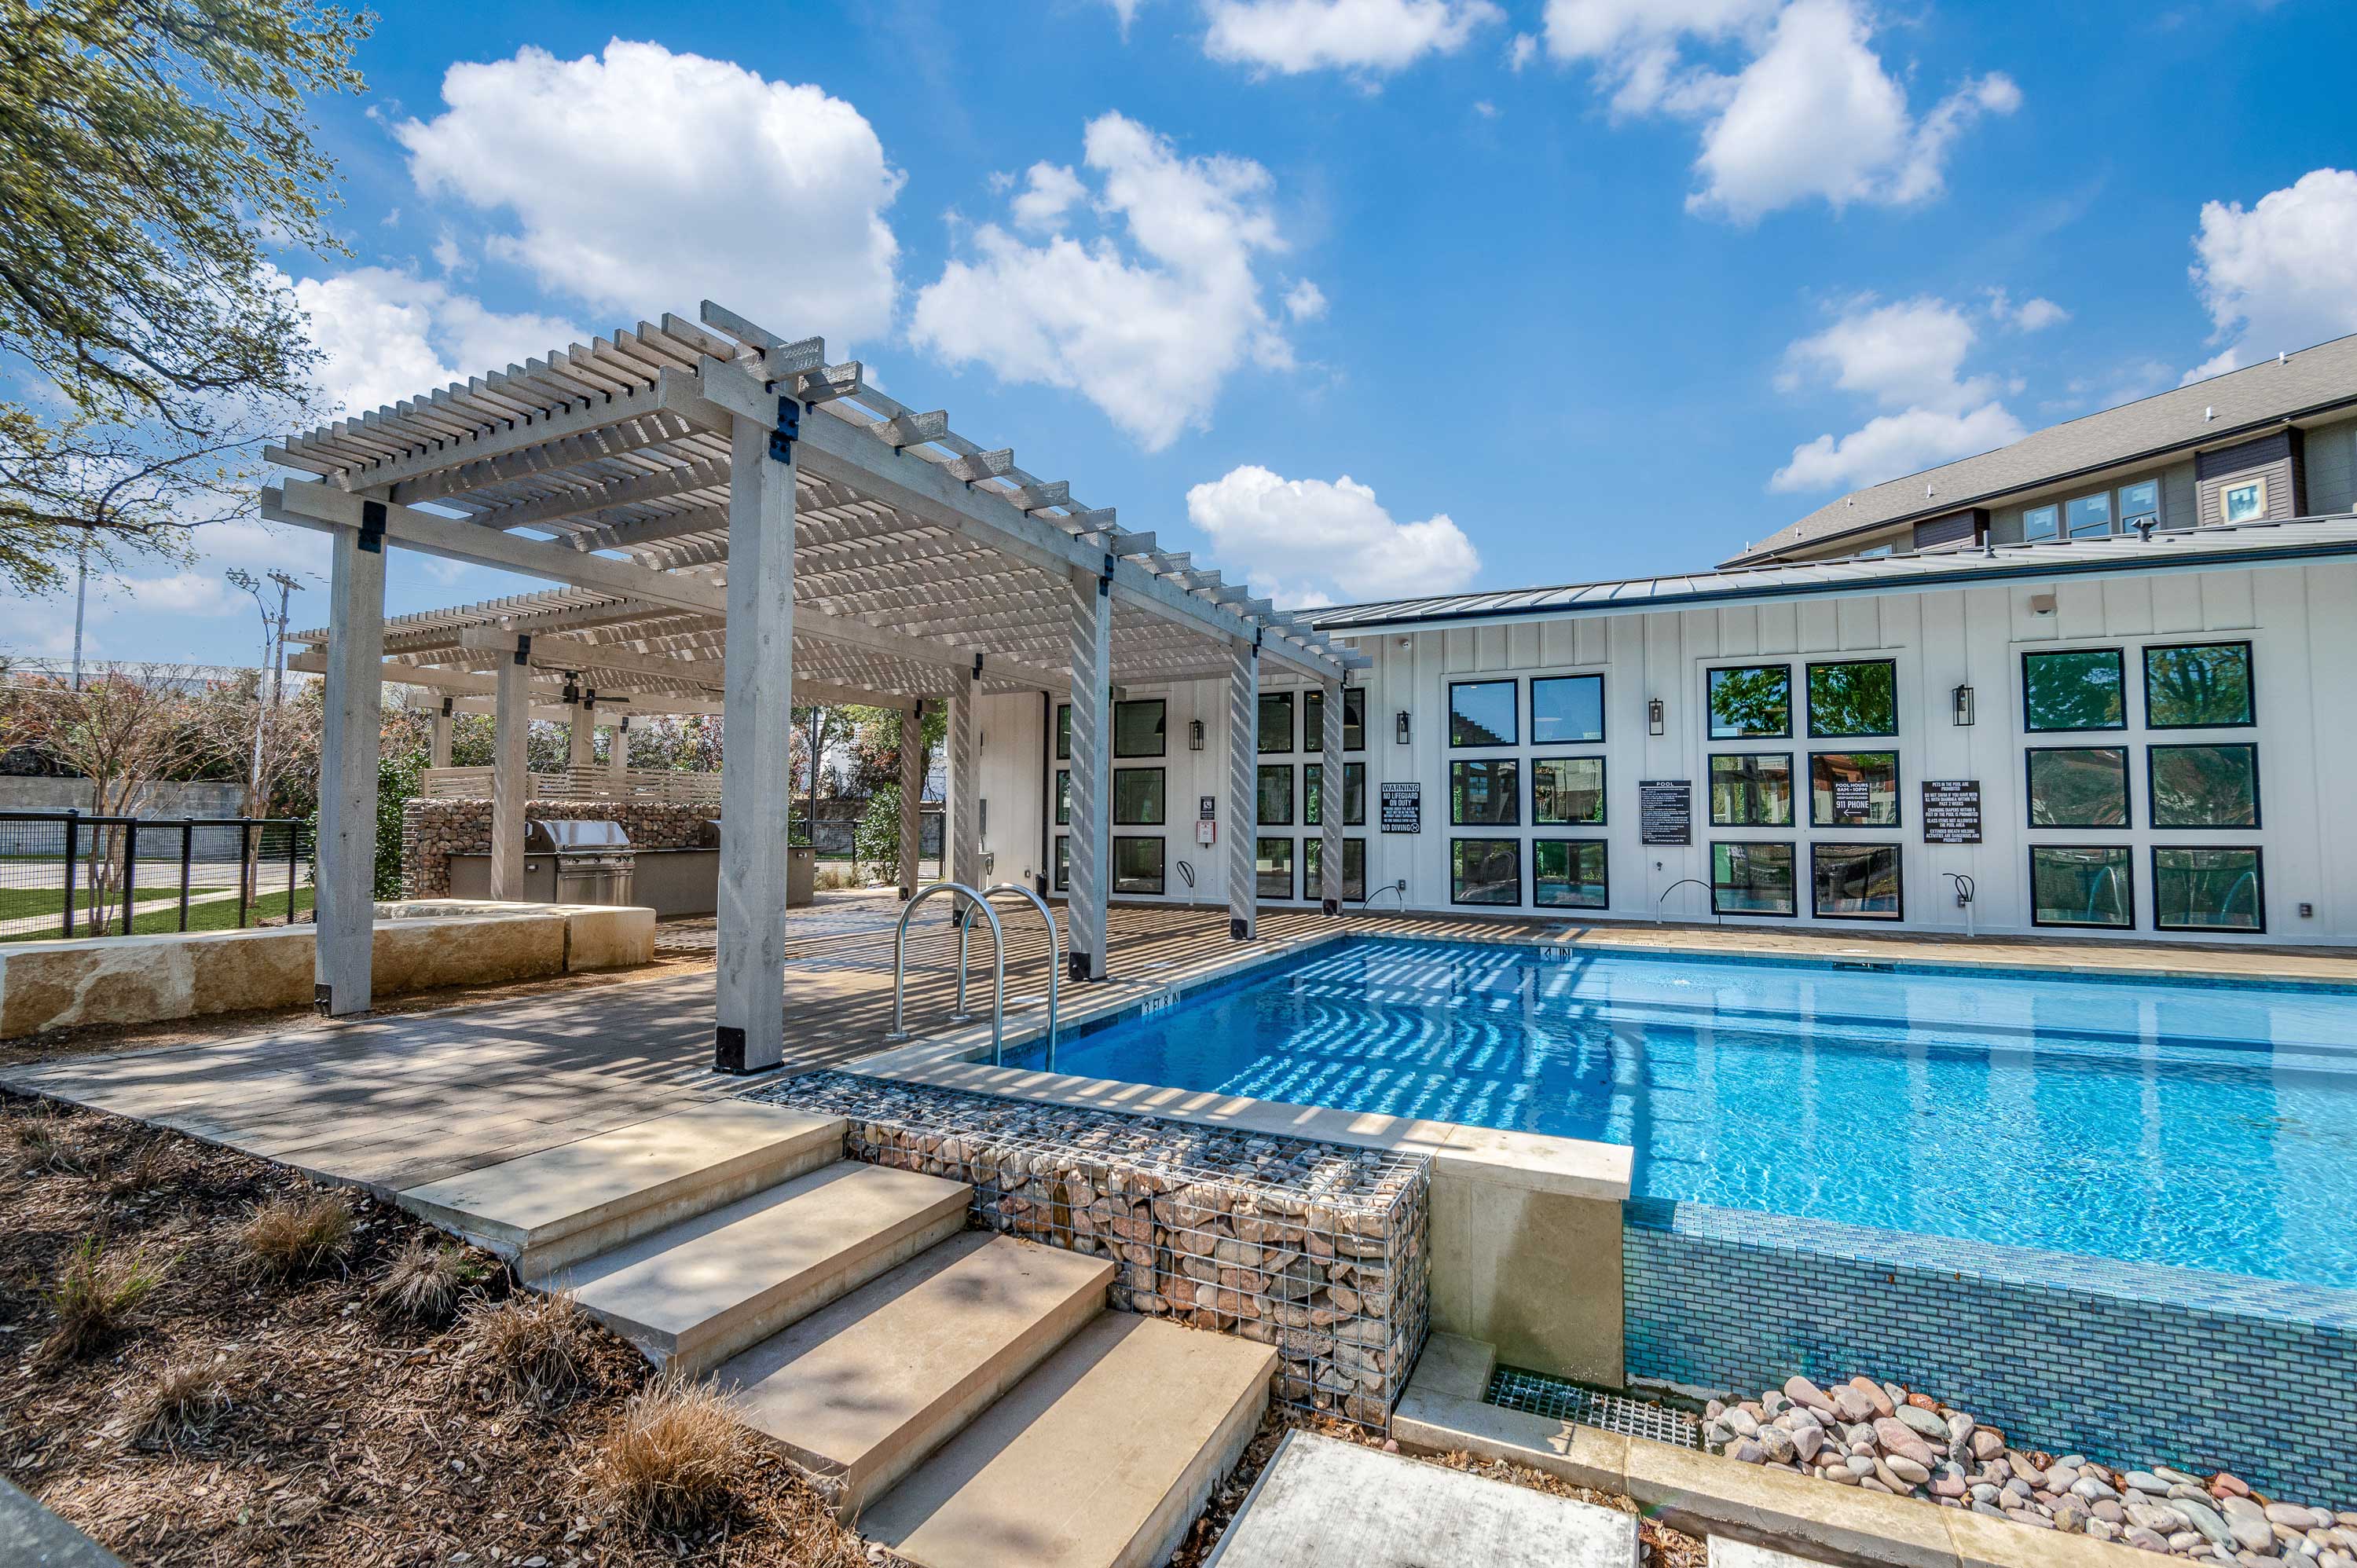 Poolside Arbor Cabana with Grilling Stations at Midway Row House.